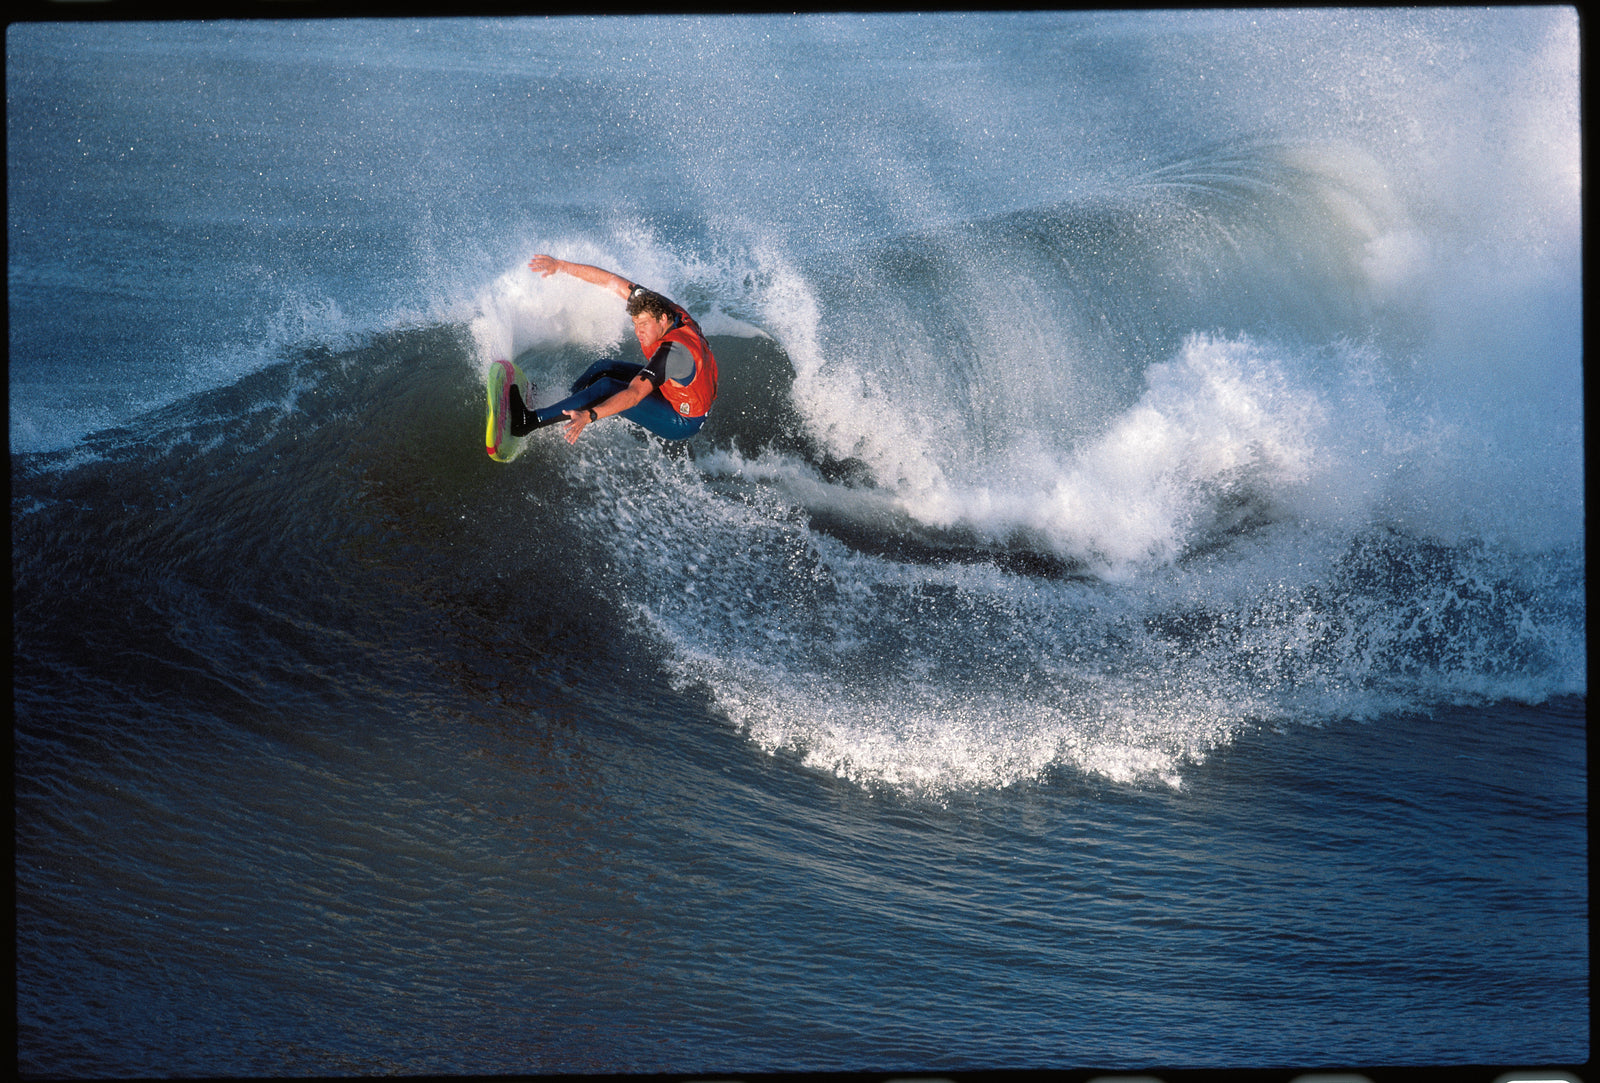 R.I.P. to Surf Legend Willy Morris